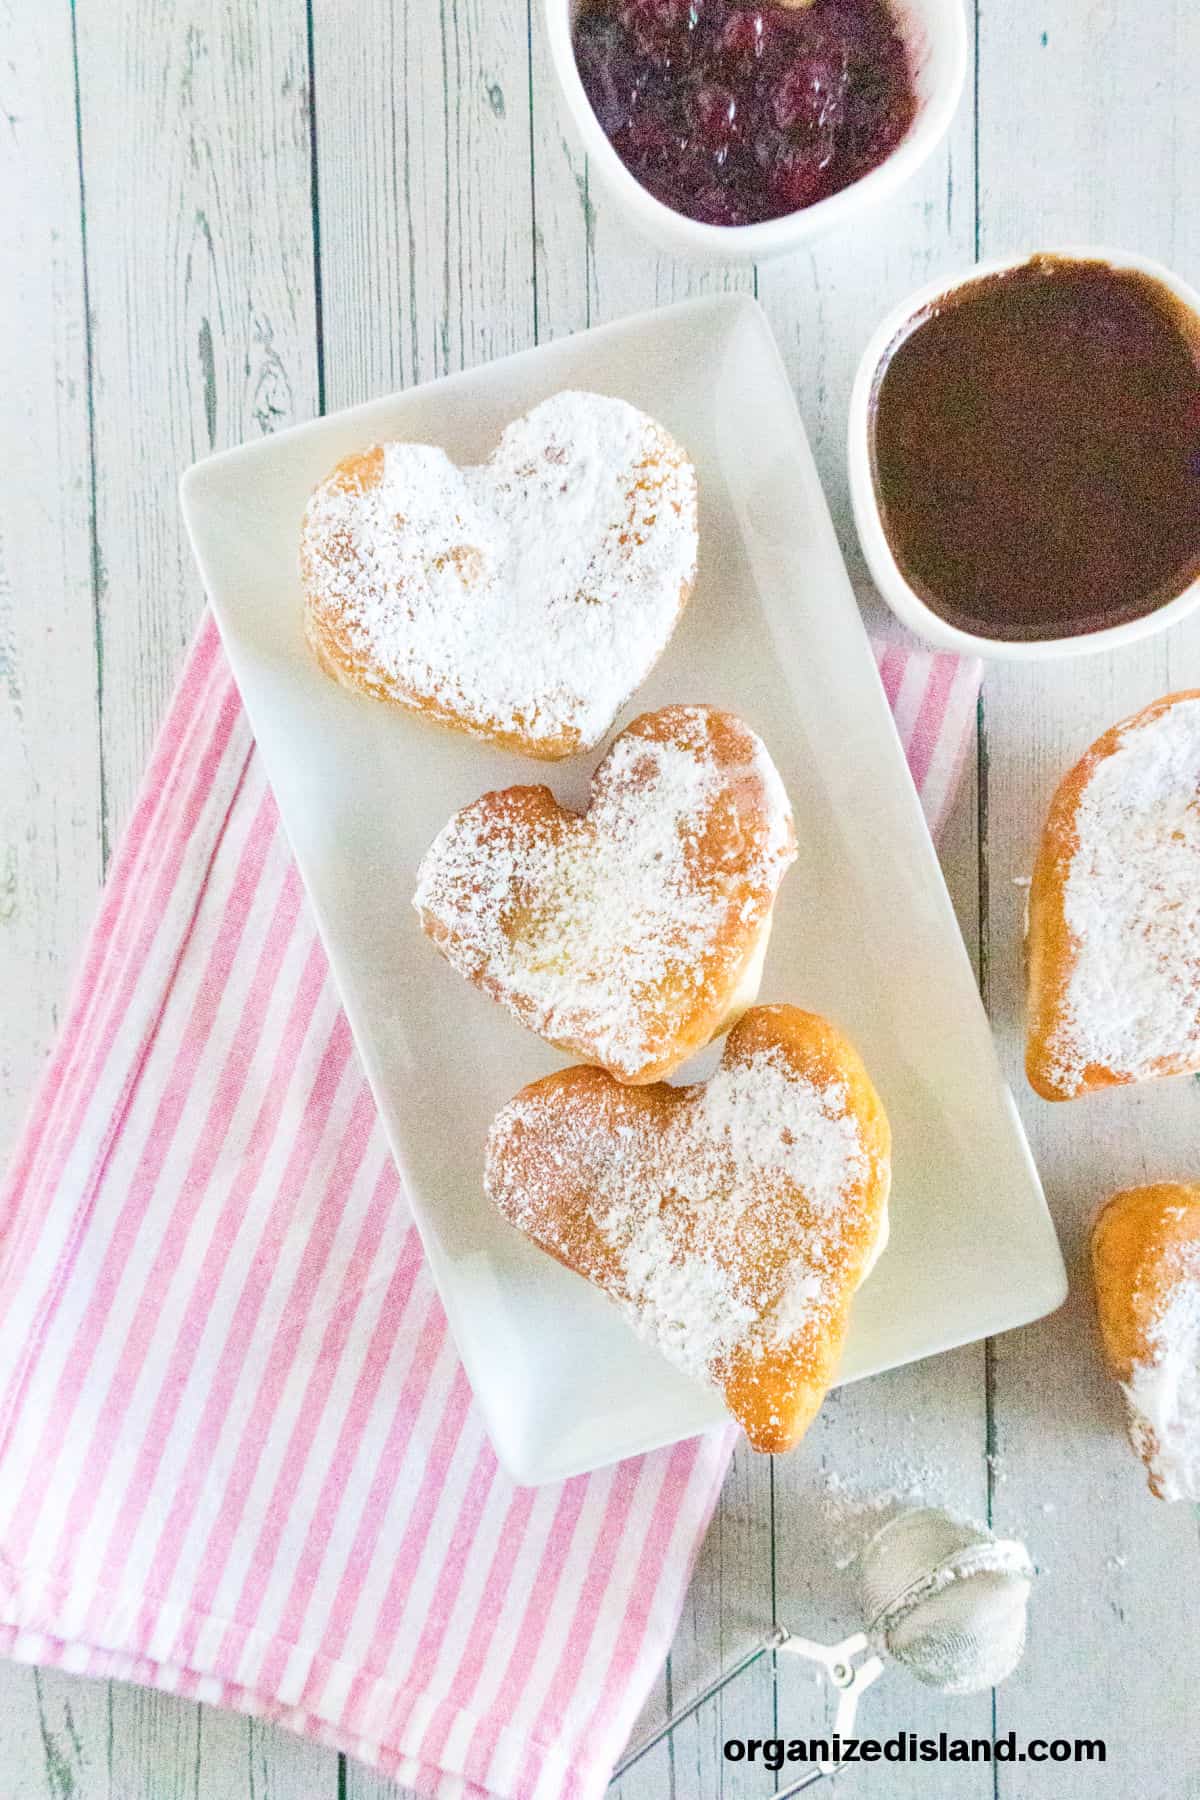 Heart Shaped Beignets on plate with chocolate sauce.